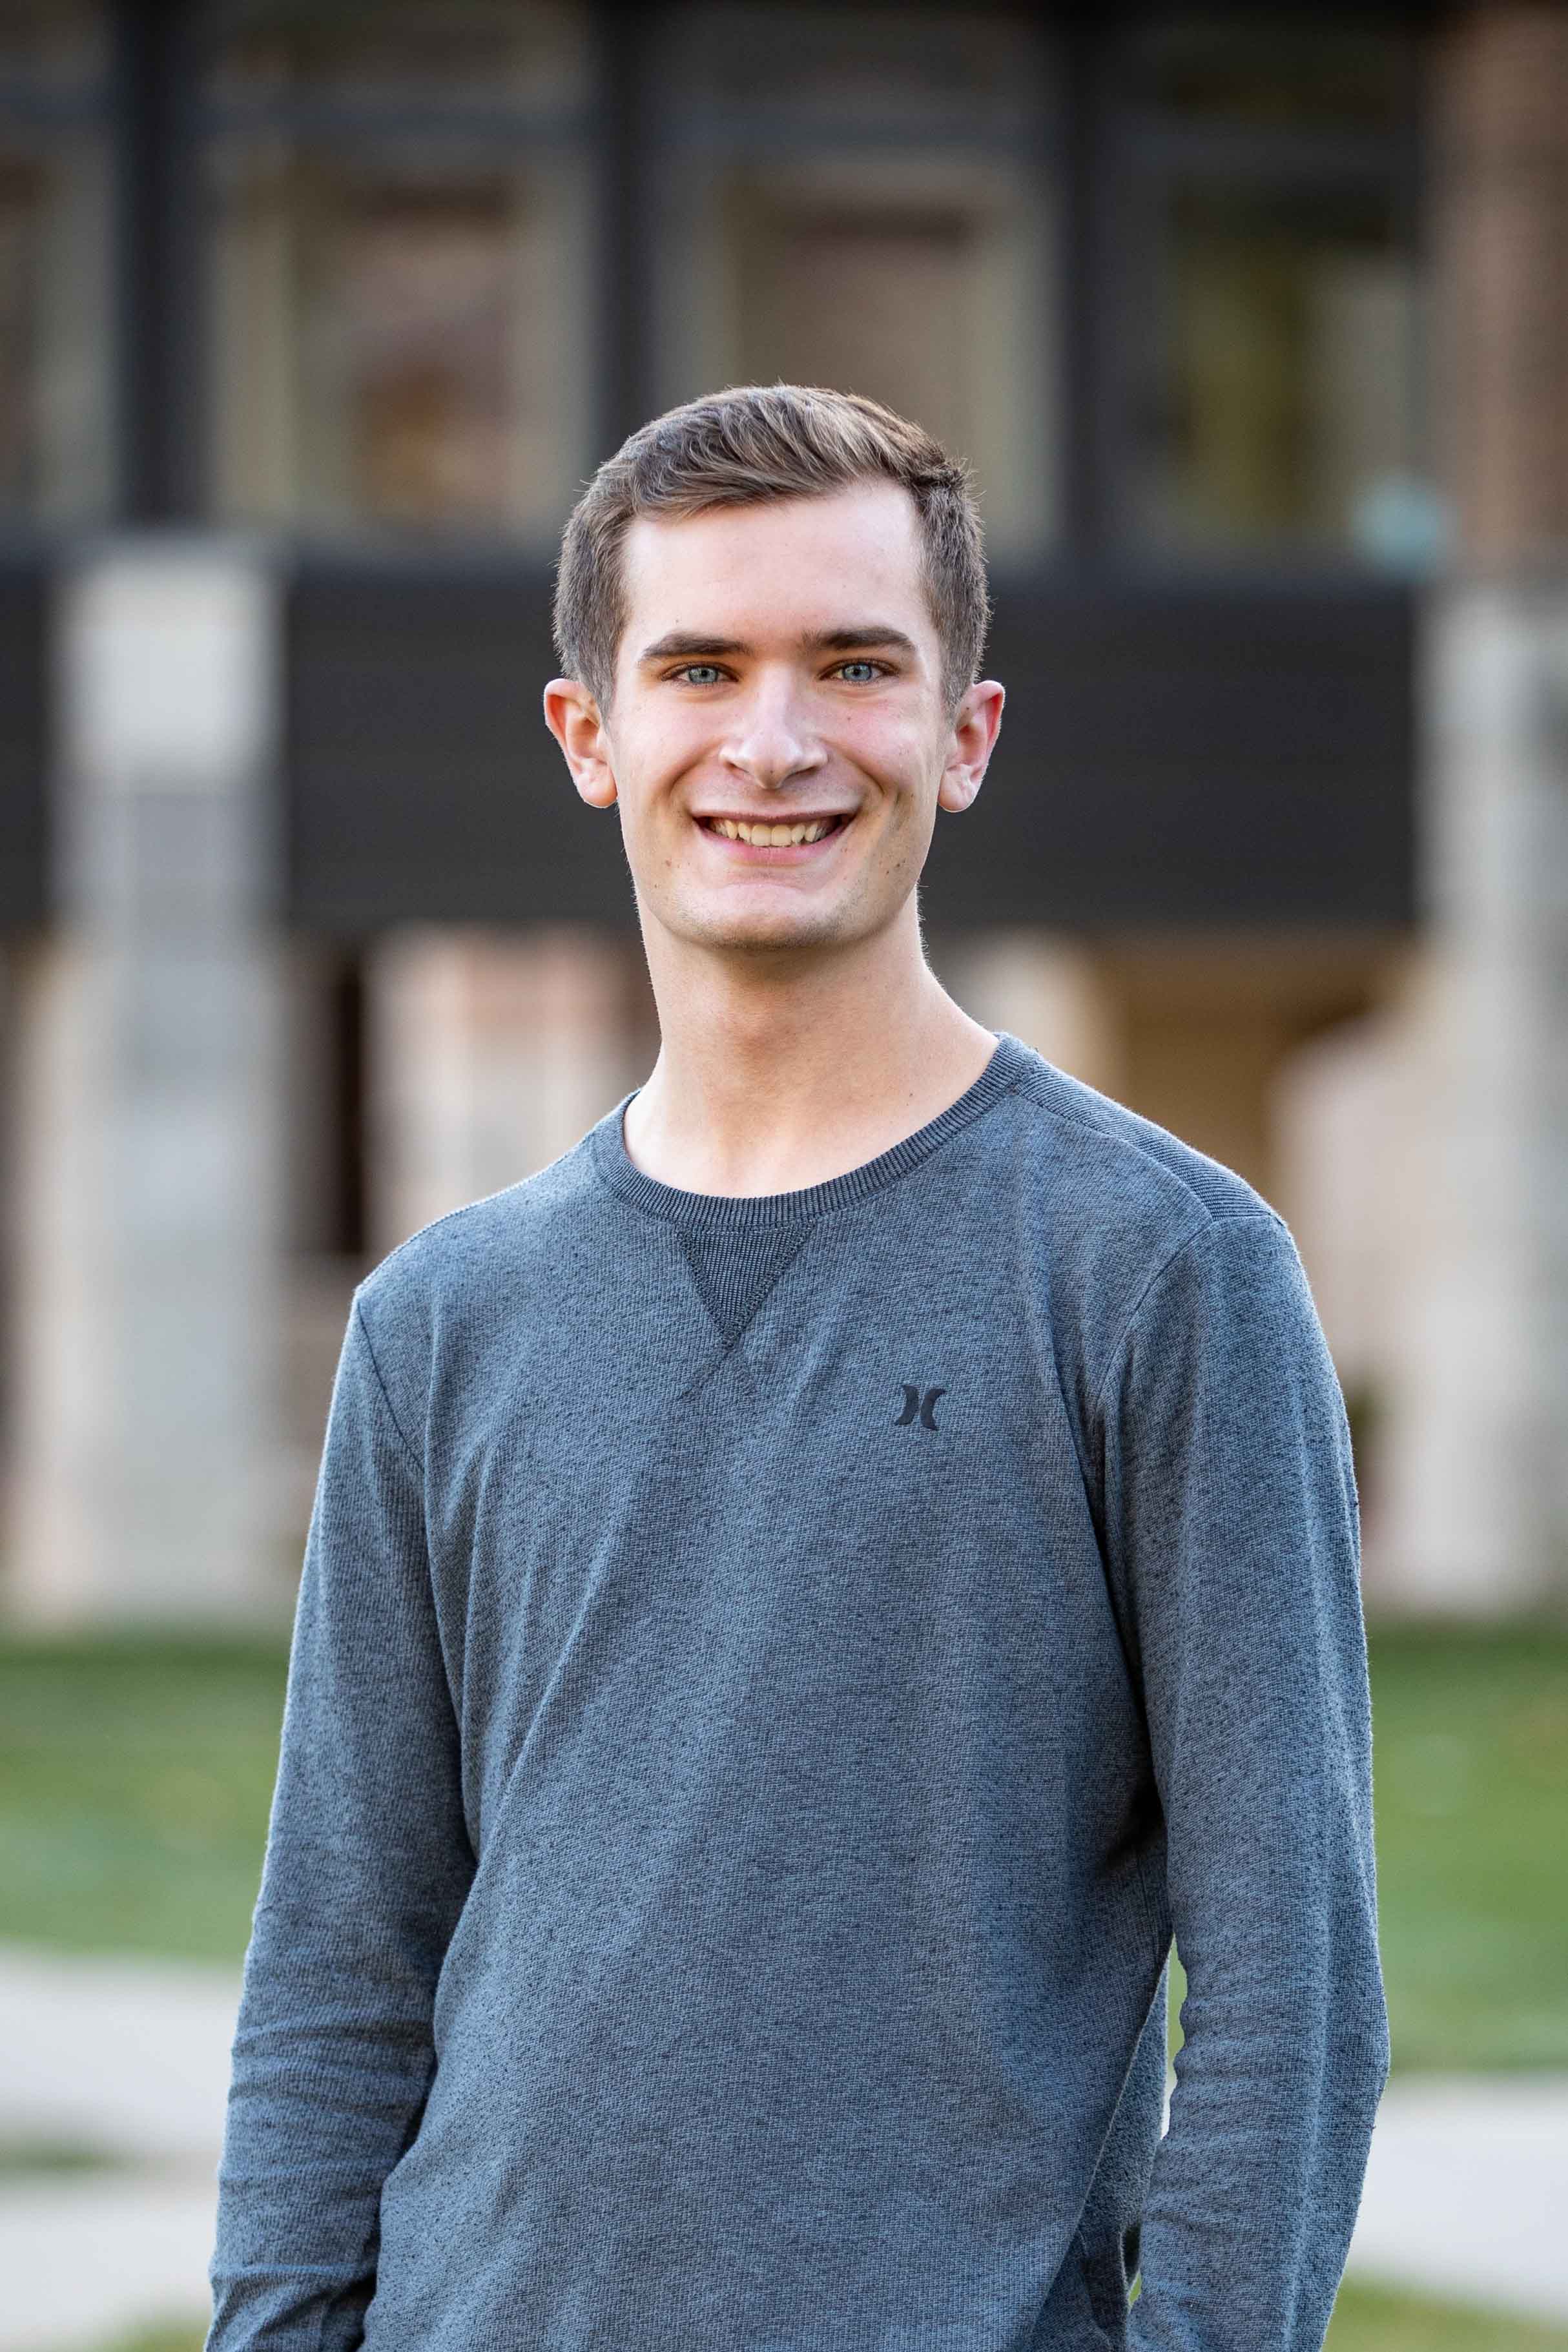 Caleb: I came to Wartburg because of the research opportunities